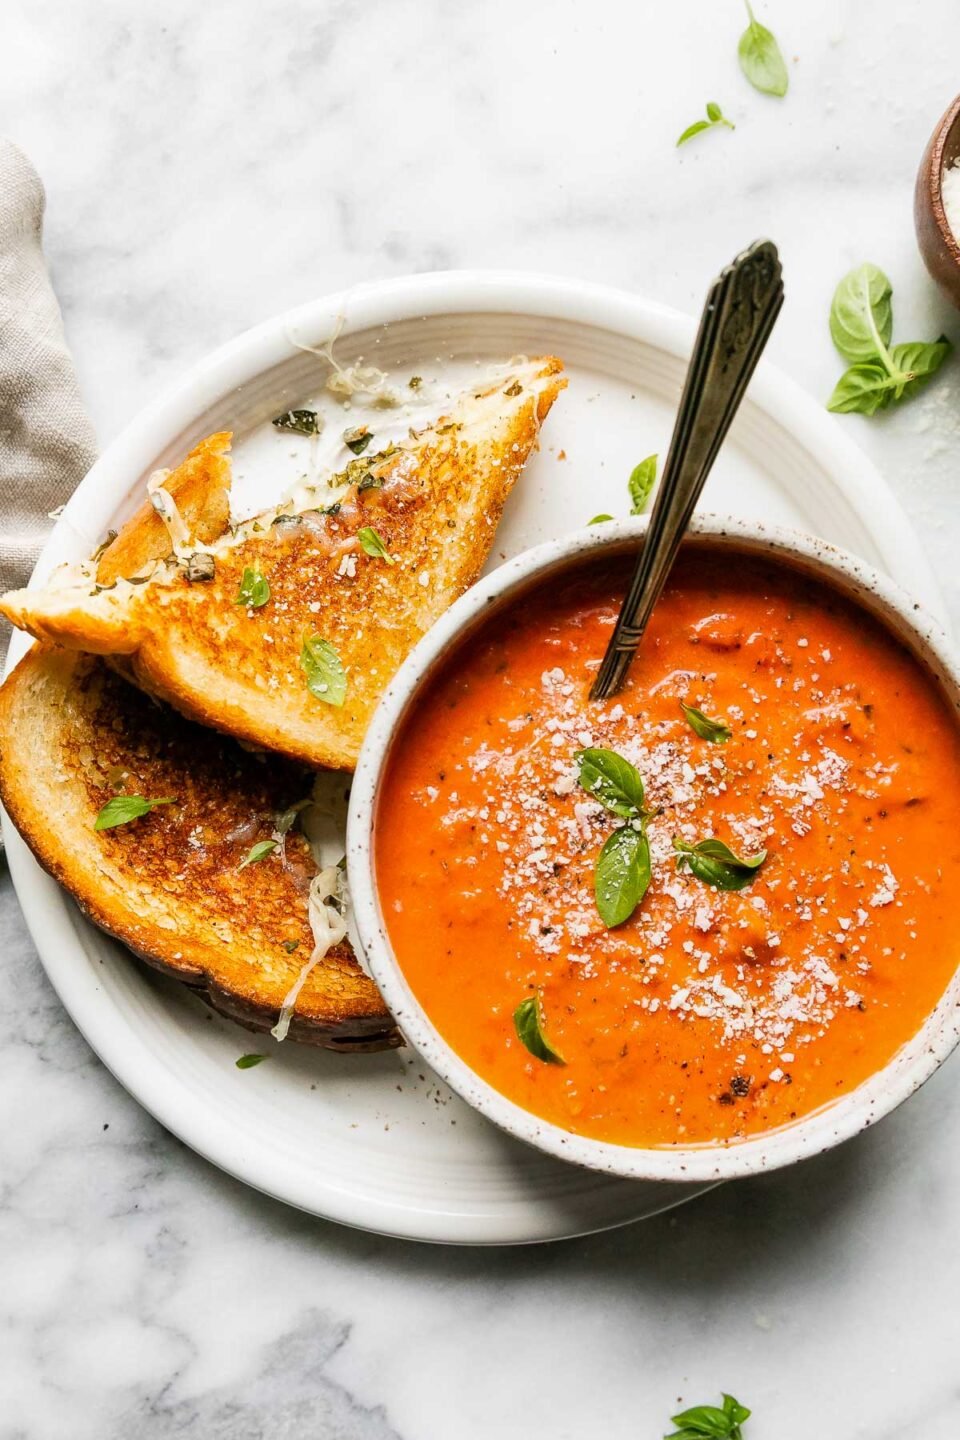 A grilled cheese with mozzarella, cut in half, rests atop a white ceramic plate alongside a small ceramic bowl filled with tomato soup. The sandwich and soup have been garnished with fresh grated parmesan and fresh basil. The plate sits atop a gray and white marble surface with a beige linen napkin and a small wooden pinch bowl filled with grated parmesan resting alongside.